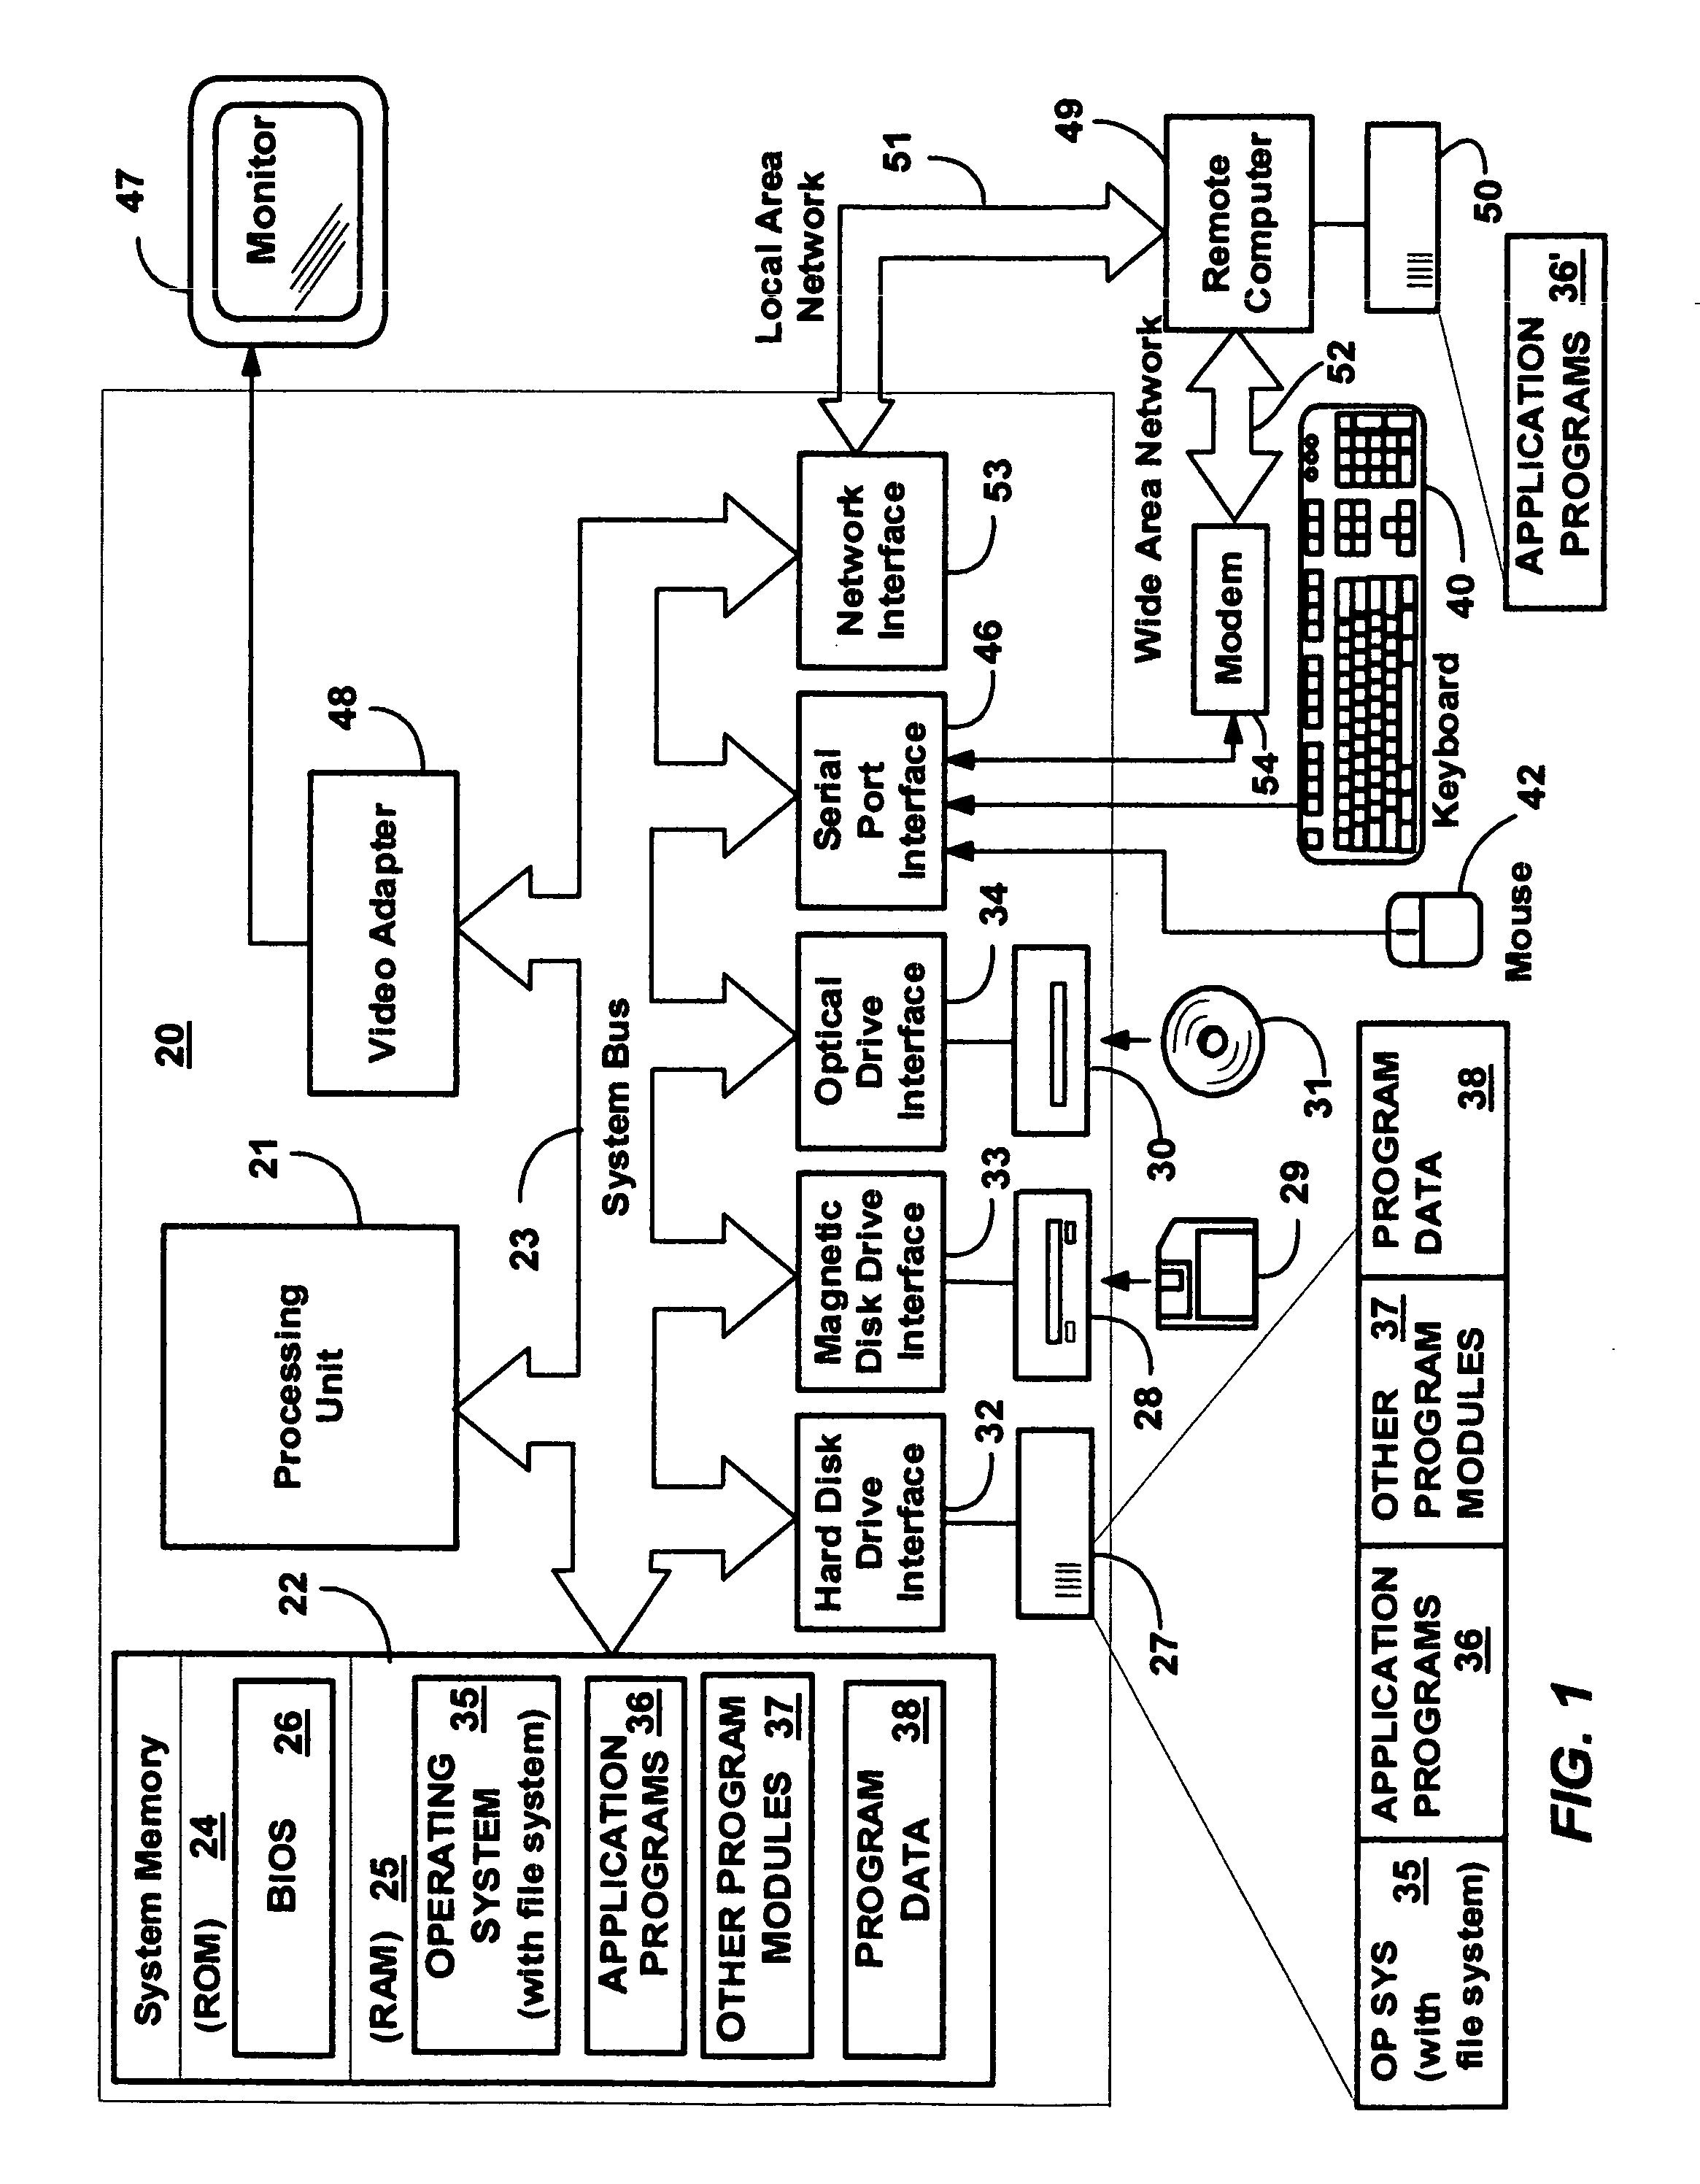 Method and system for accurately calculating latency variation on an end-to-end path in a network